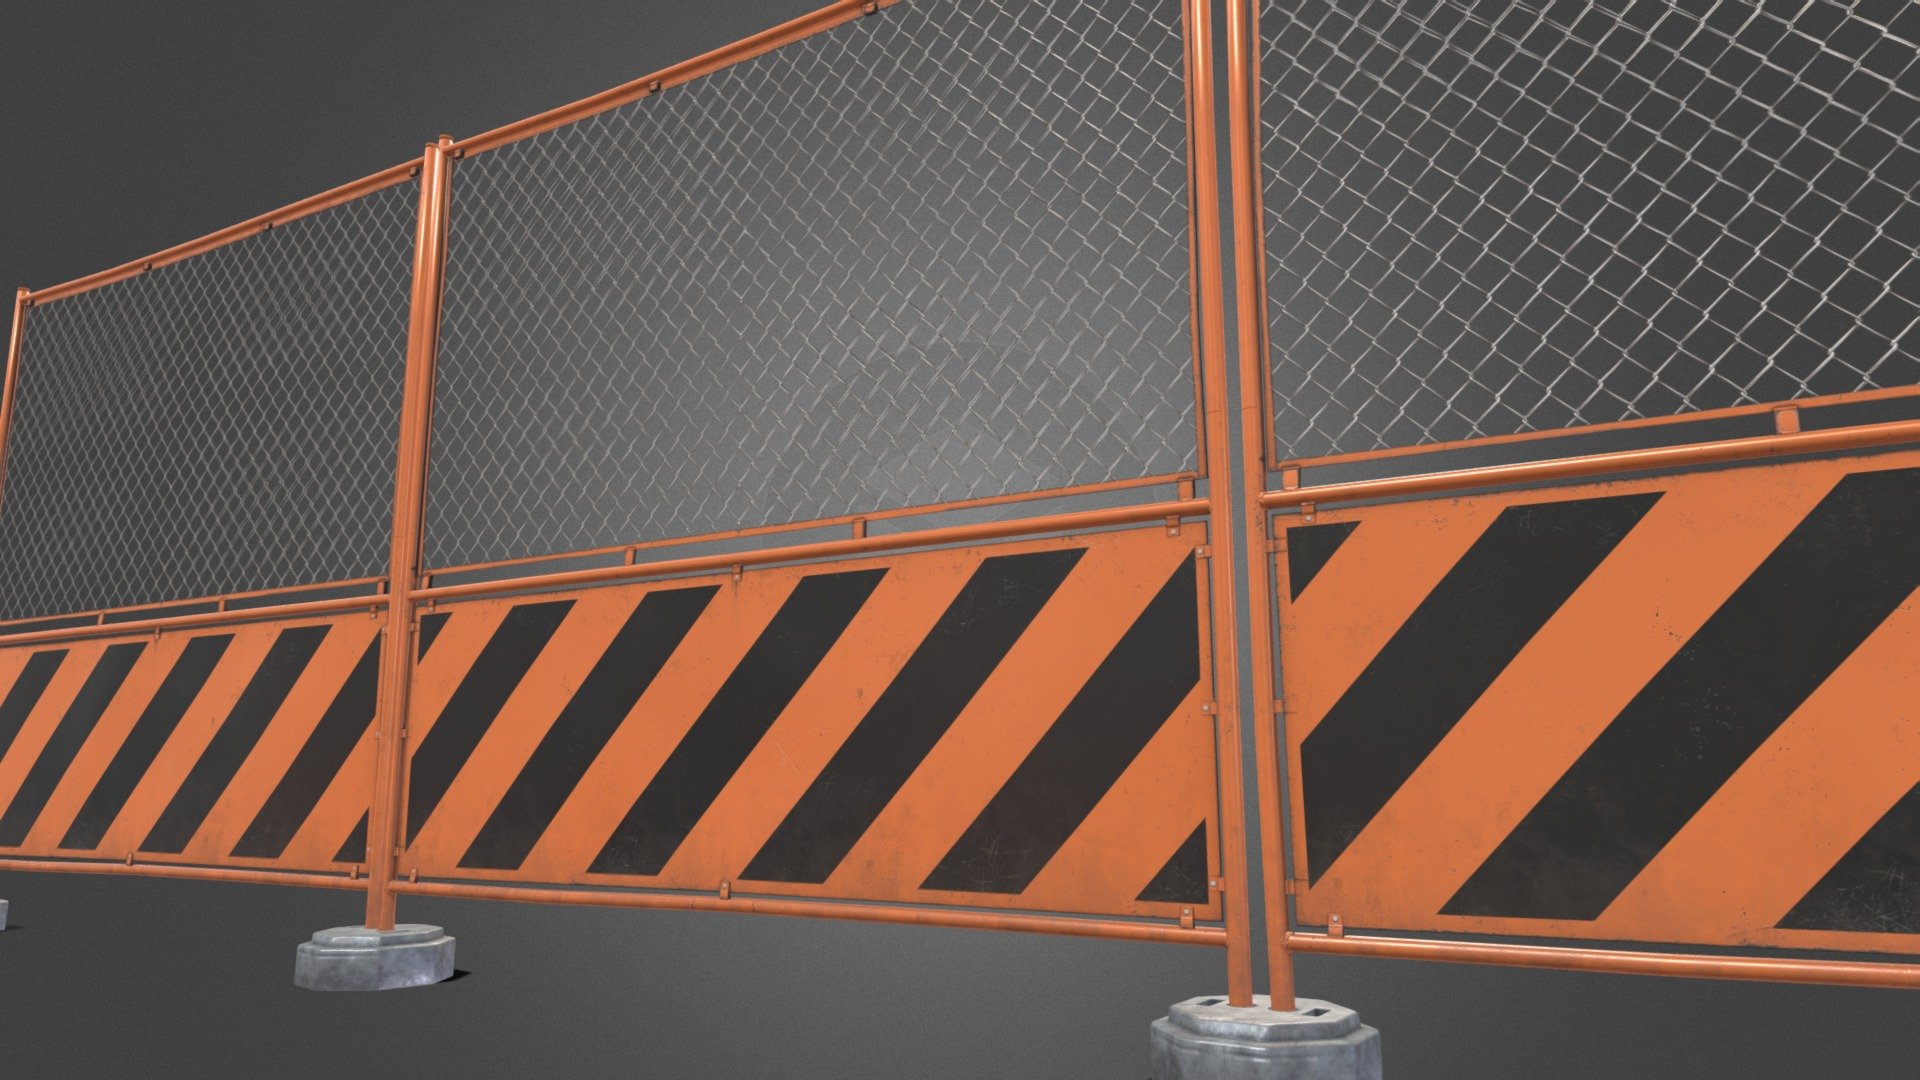 Low poly model for game.

You can purchase it here!!
https://www.unrealengine.com/marketplace/ja/product/87f4d767f36c440596e8cff32f57b4a7 - Guard Fence - 3D model by 1kawam14 3d model